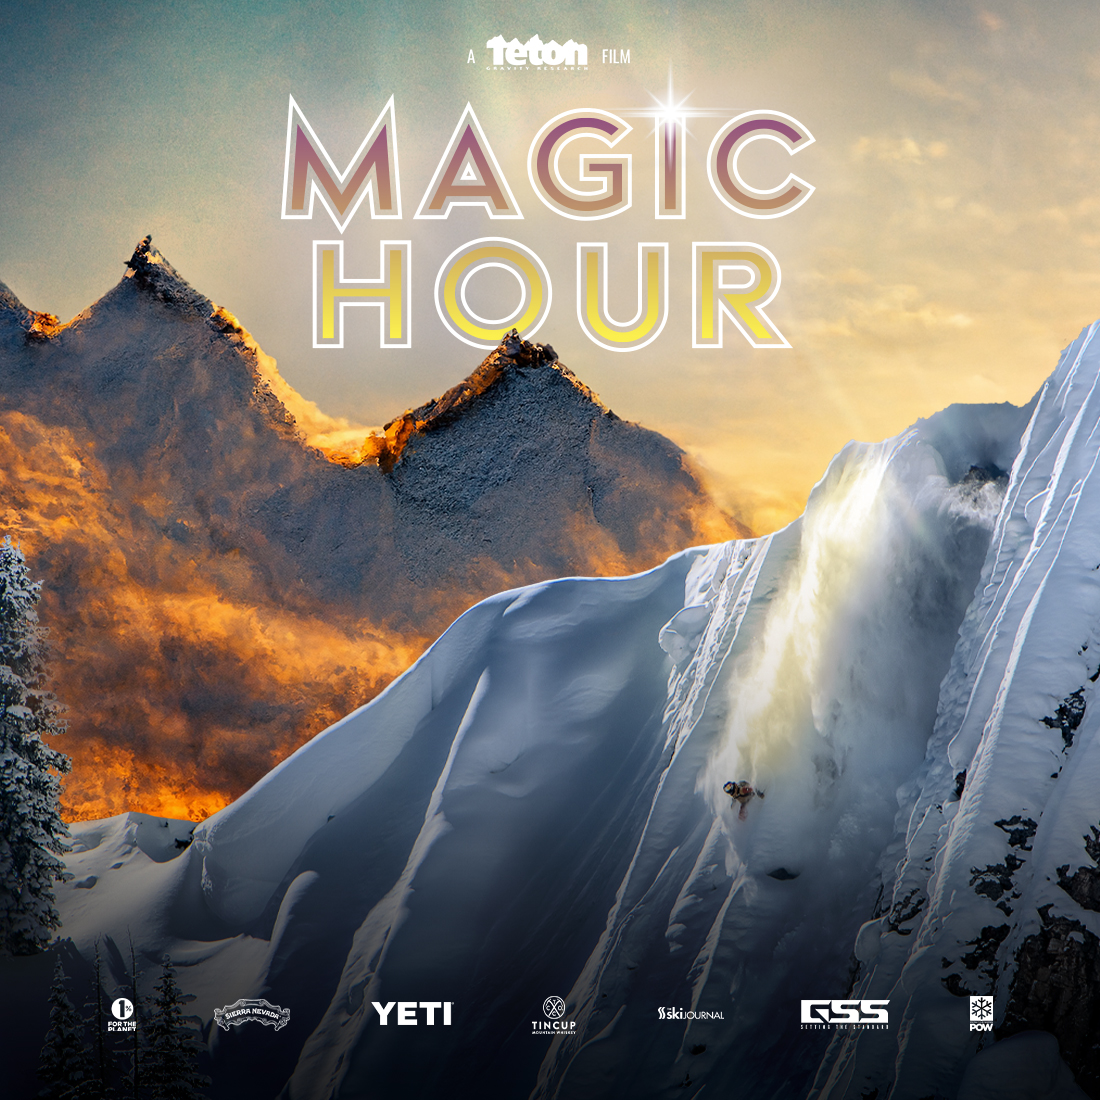 ❄ JUST ANNOUNCED ❄ @TetonGravity Research: Magic Hour, a ski and snowboard film screens here on THU, NOV 17! Come out, grab some popcorn, and see some of the most incredible action sports athletes on film. Tickets go on sale FRI, SEP 16 at 10AM-->> bit.ly/3DlJpB3